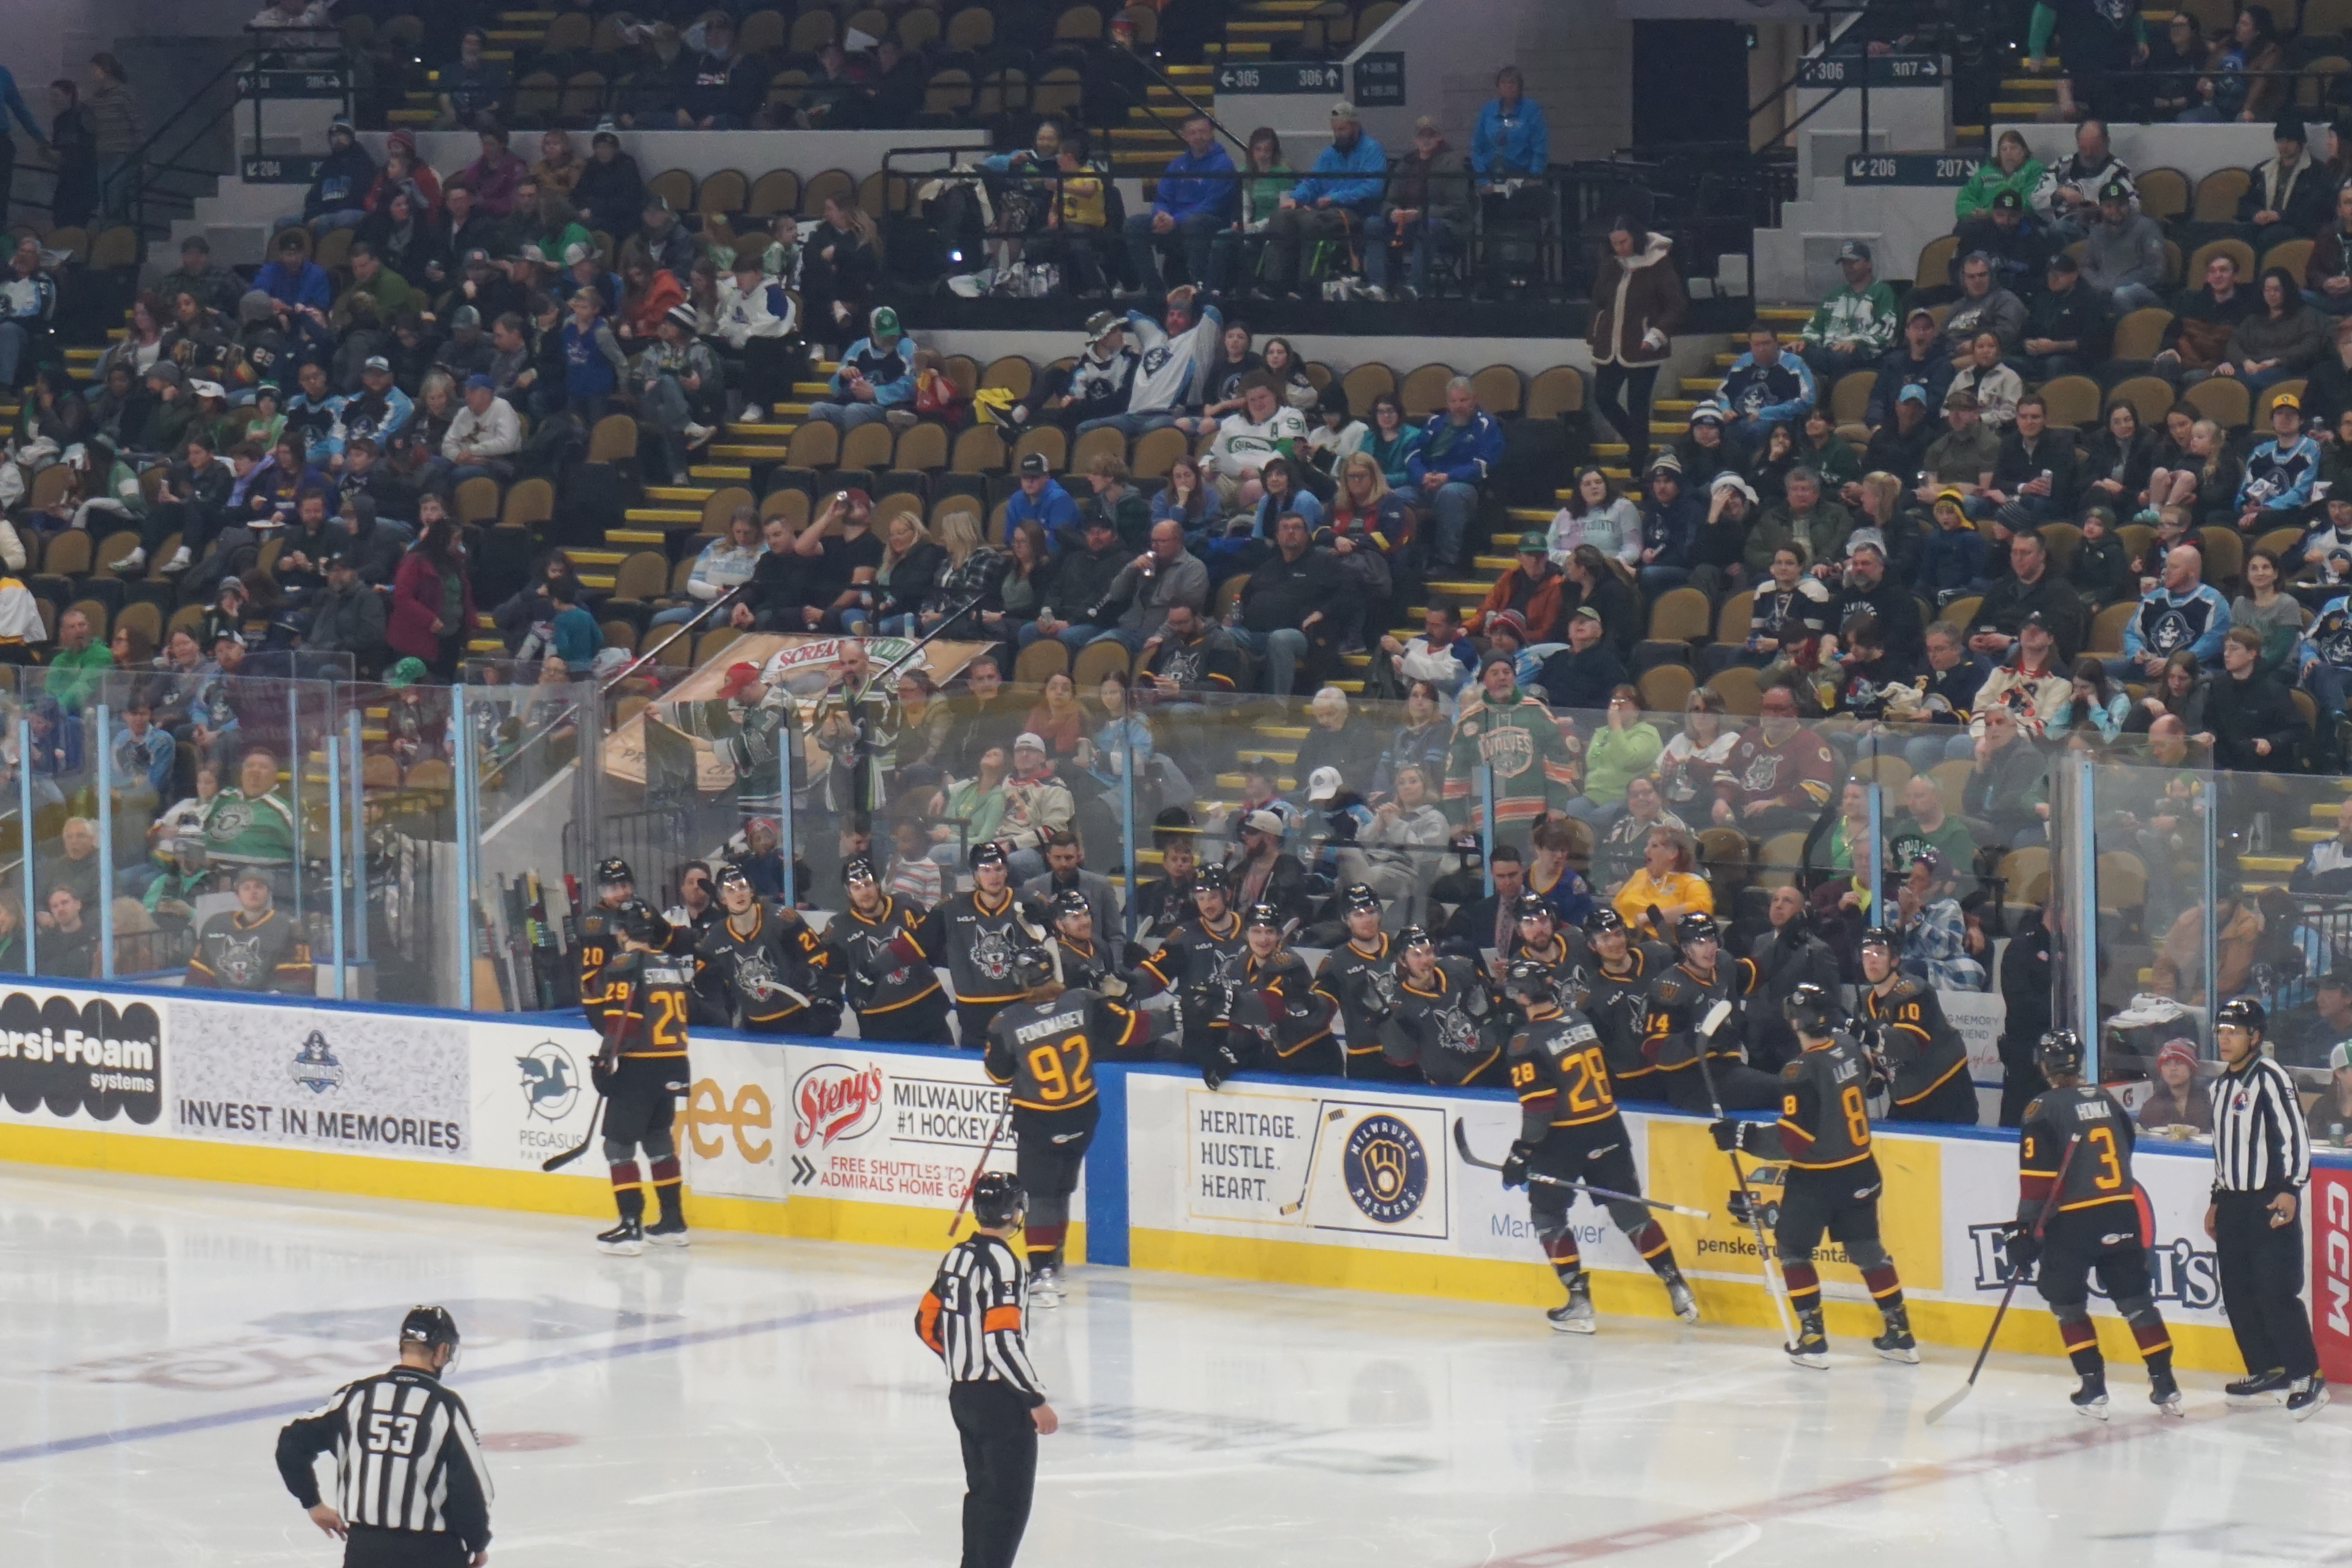 File:Chicago Wolves vs. Milwaukee Admirals March 2023 41 (Chicago